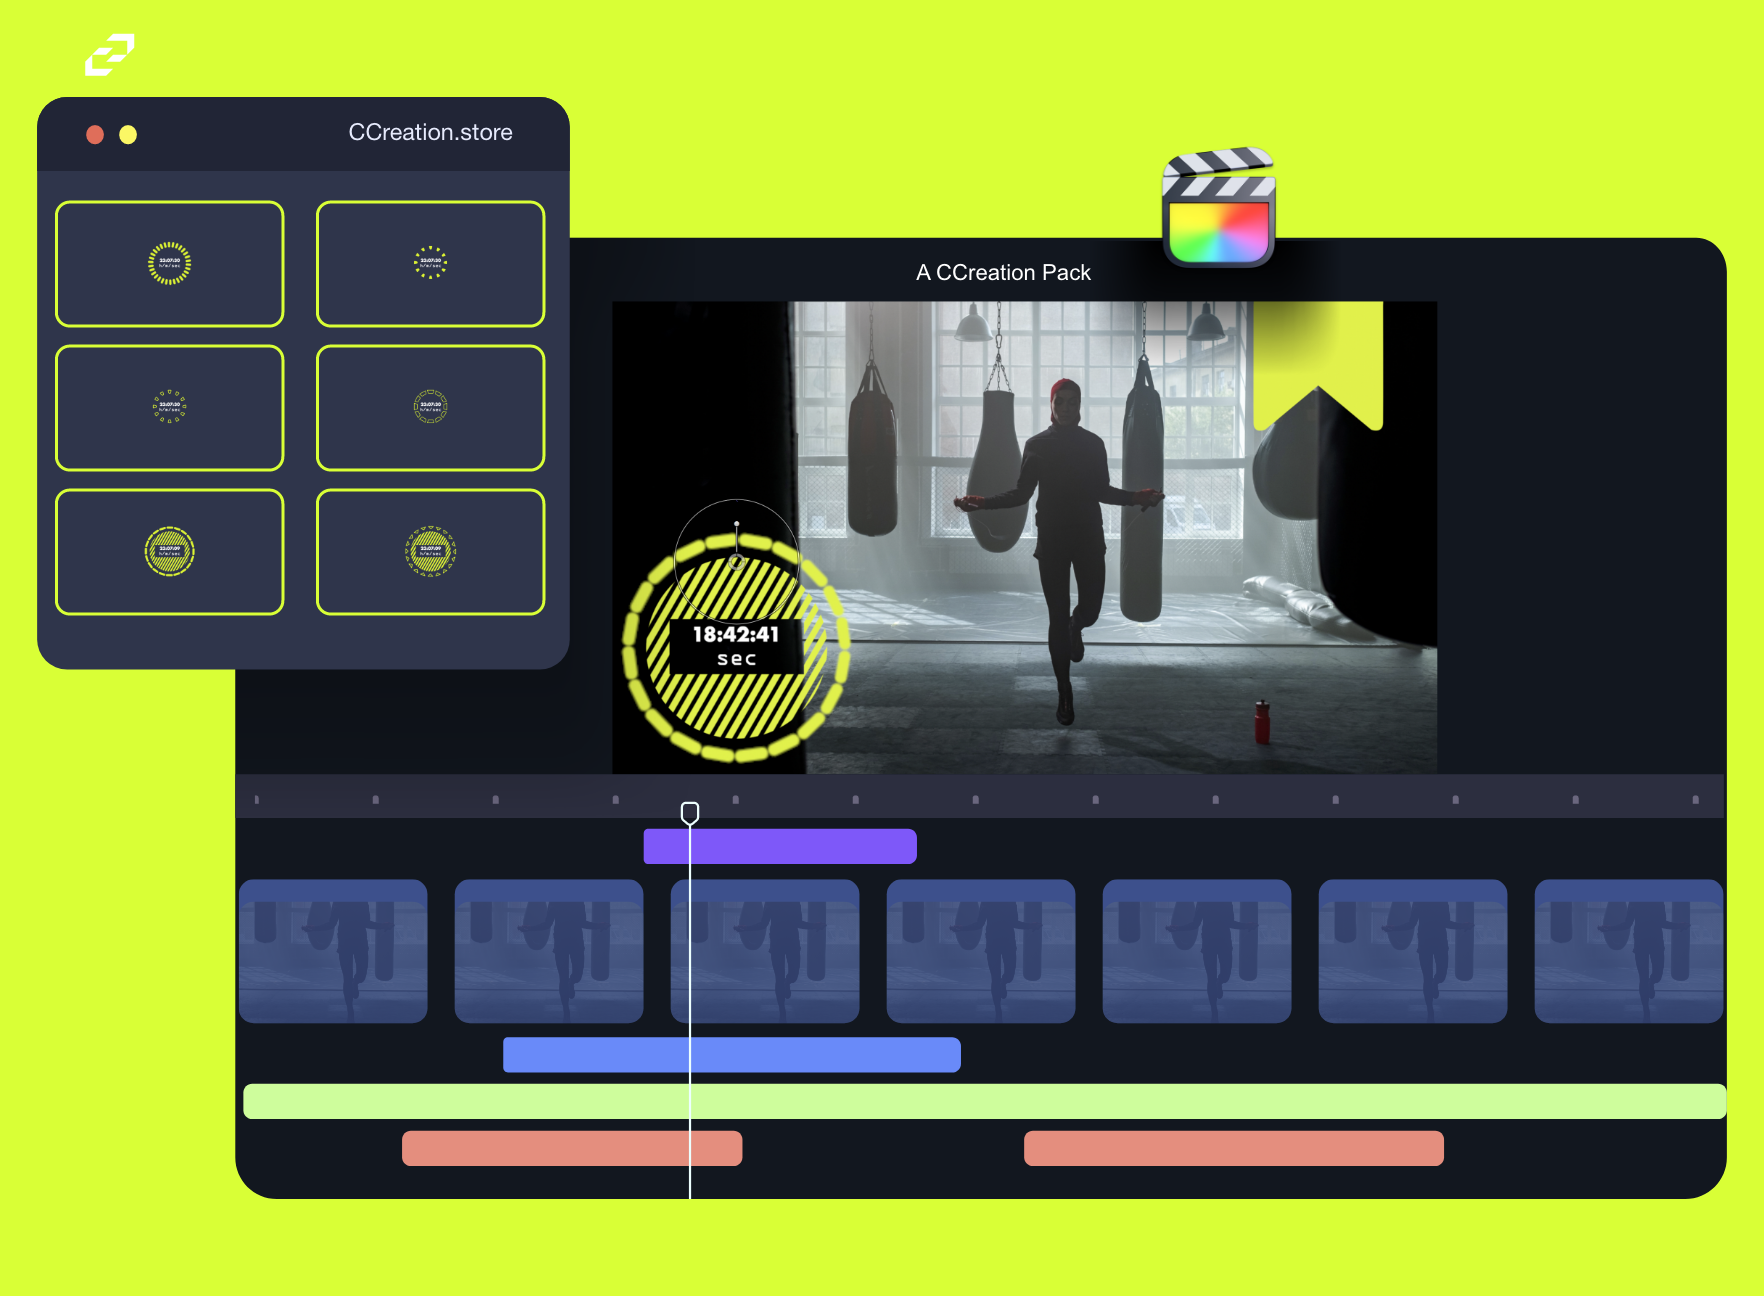 Countdown Timer Toolkit, Final Cut Pro Templates -  CCreation Store